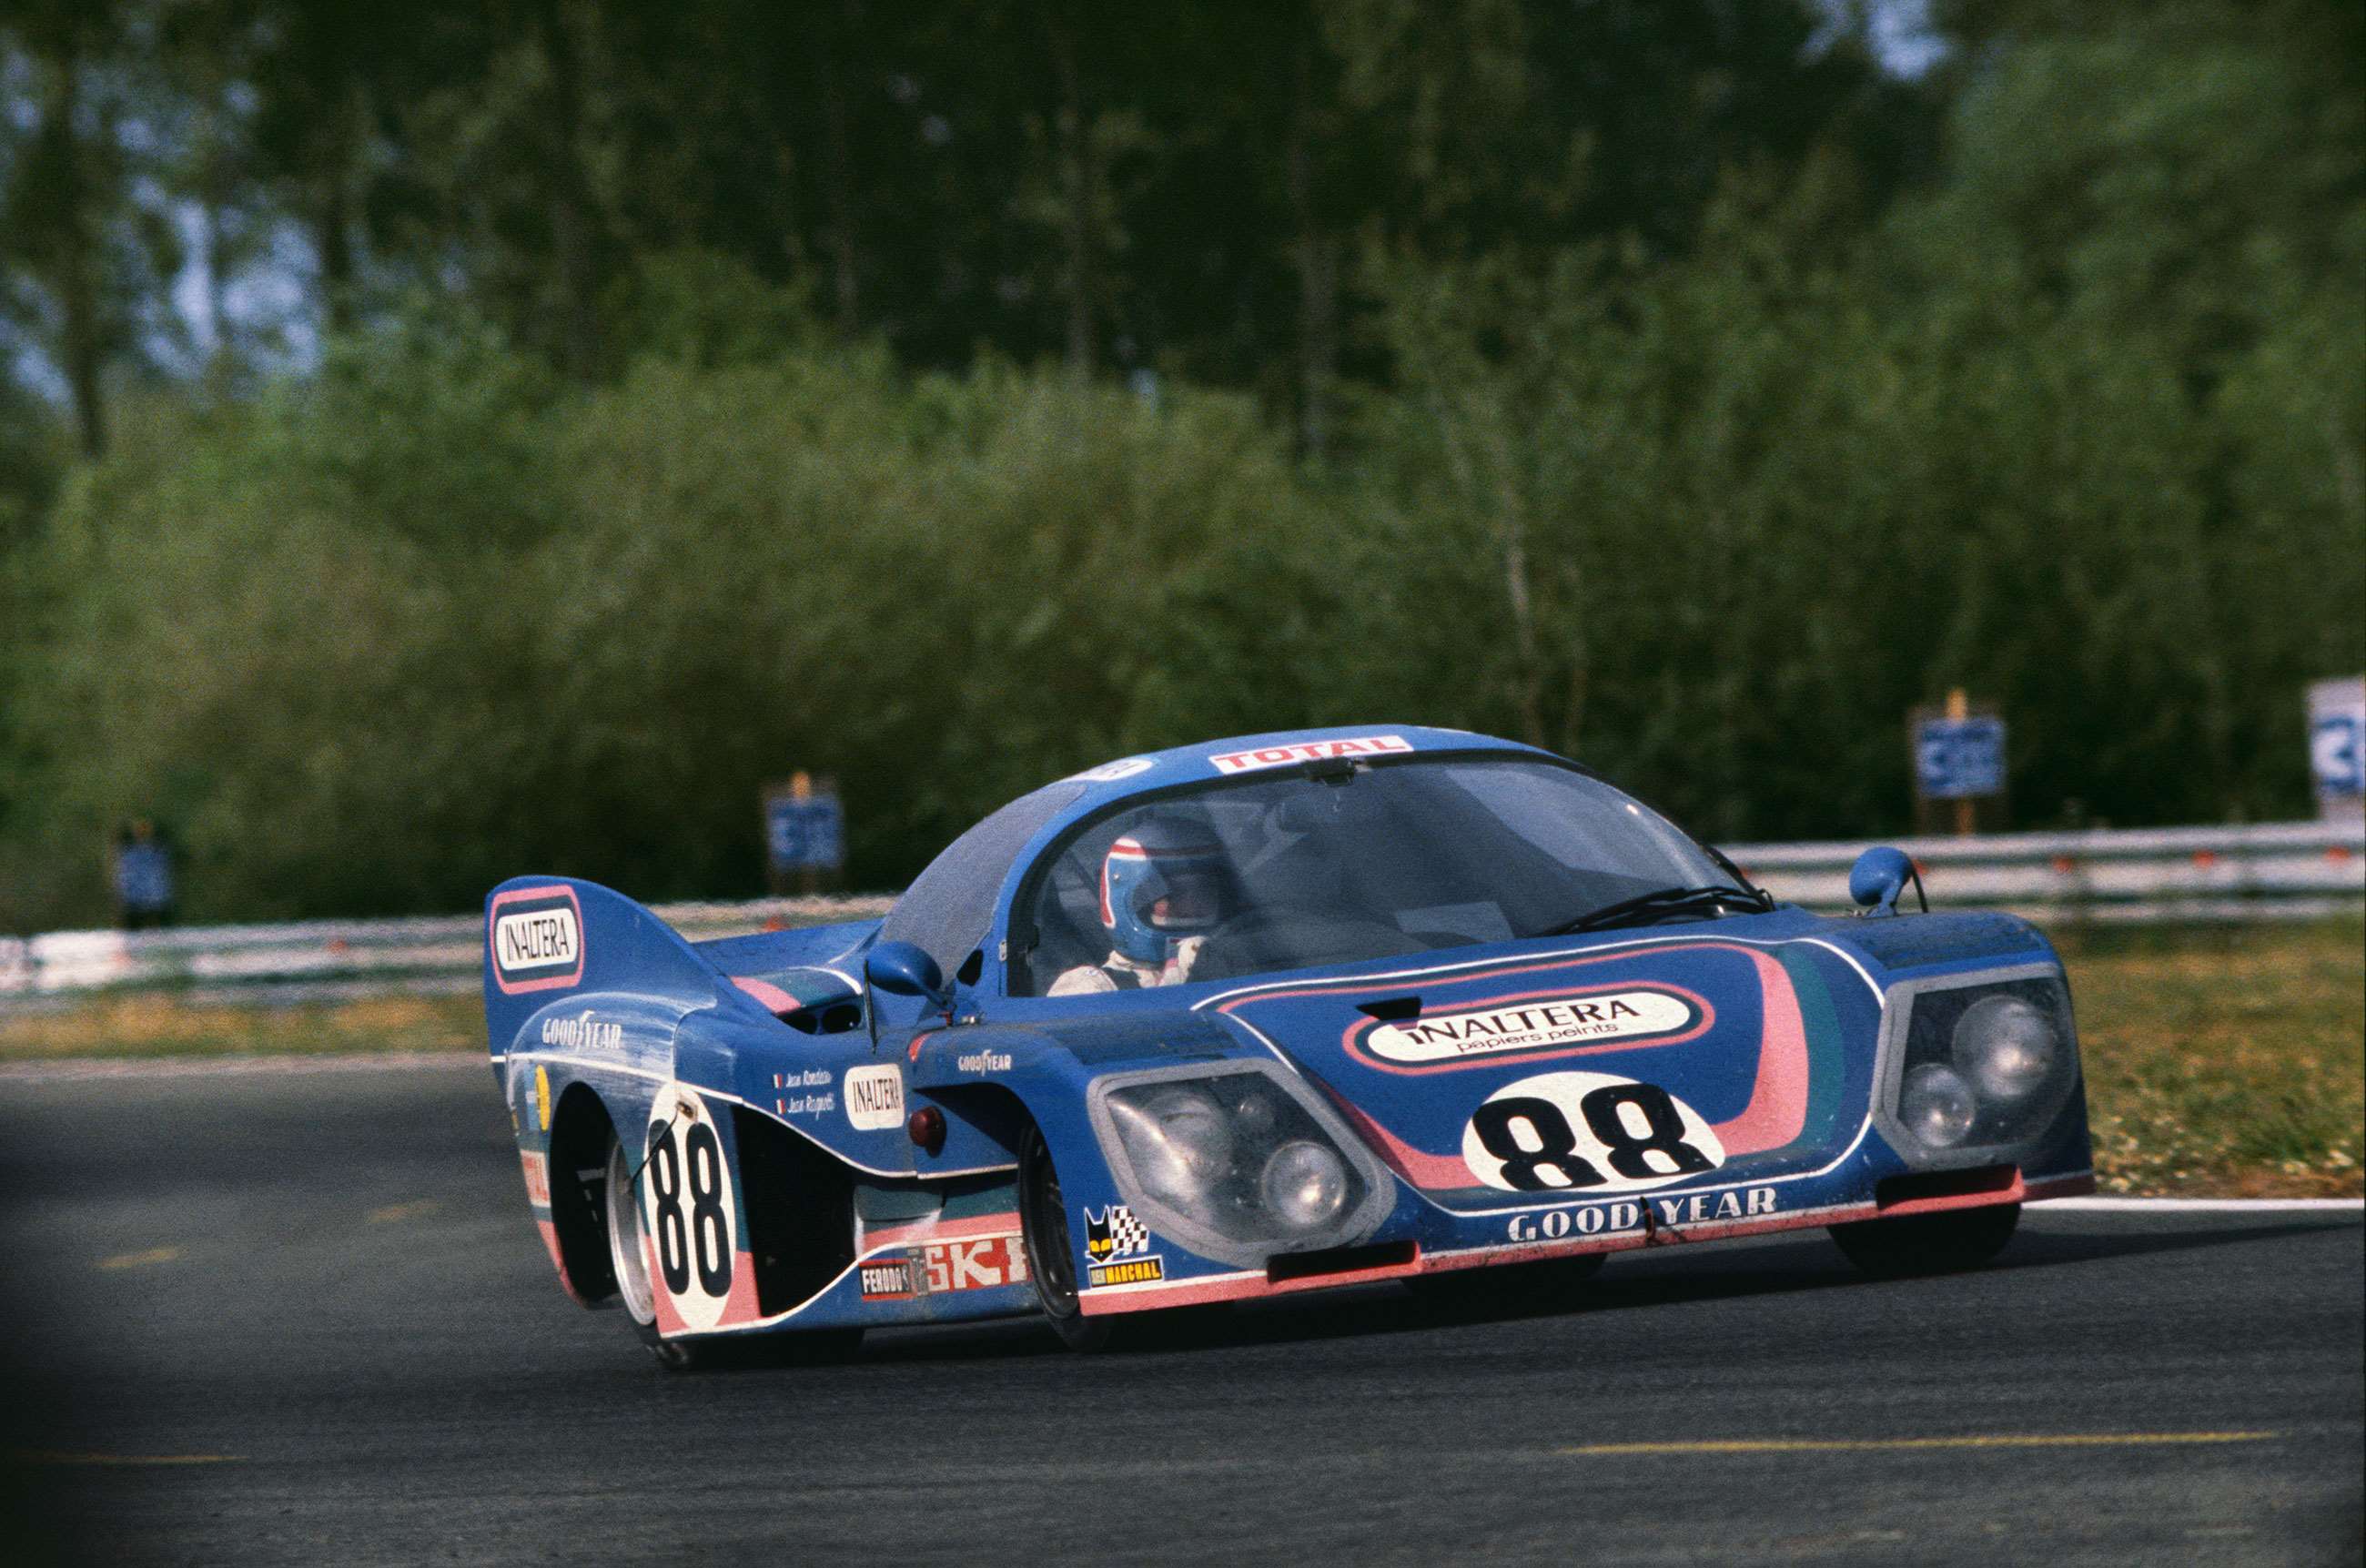 The Inaltera LM77 Ford of Jean Rondeau and Jean Ragnotti that finished in fourth at Le Mans in 1977.